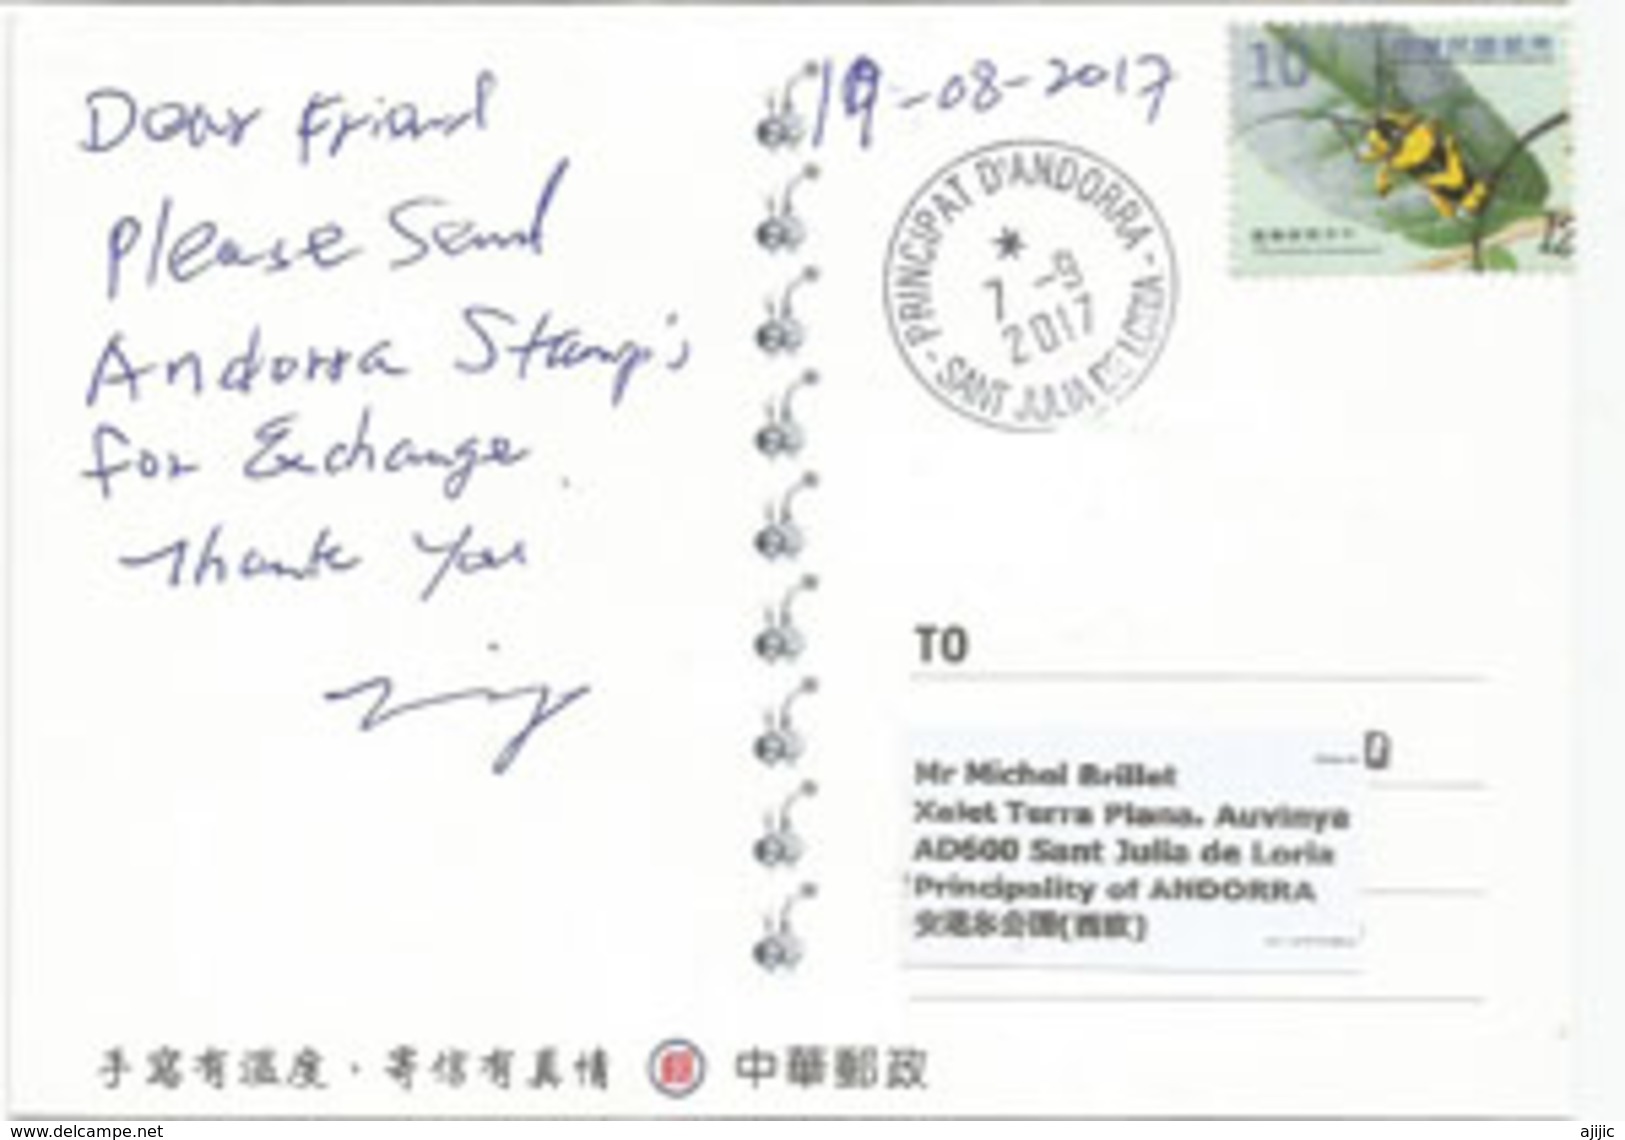 Fenggang Onion Of China, Postcard Addeessed To Andorra, With Arrival Postmark - Plantes Médicinales